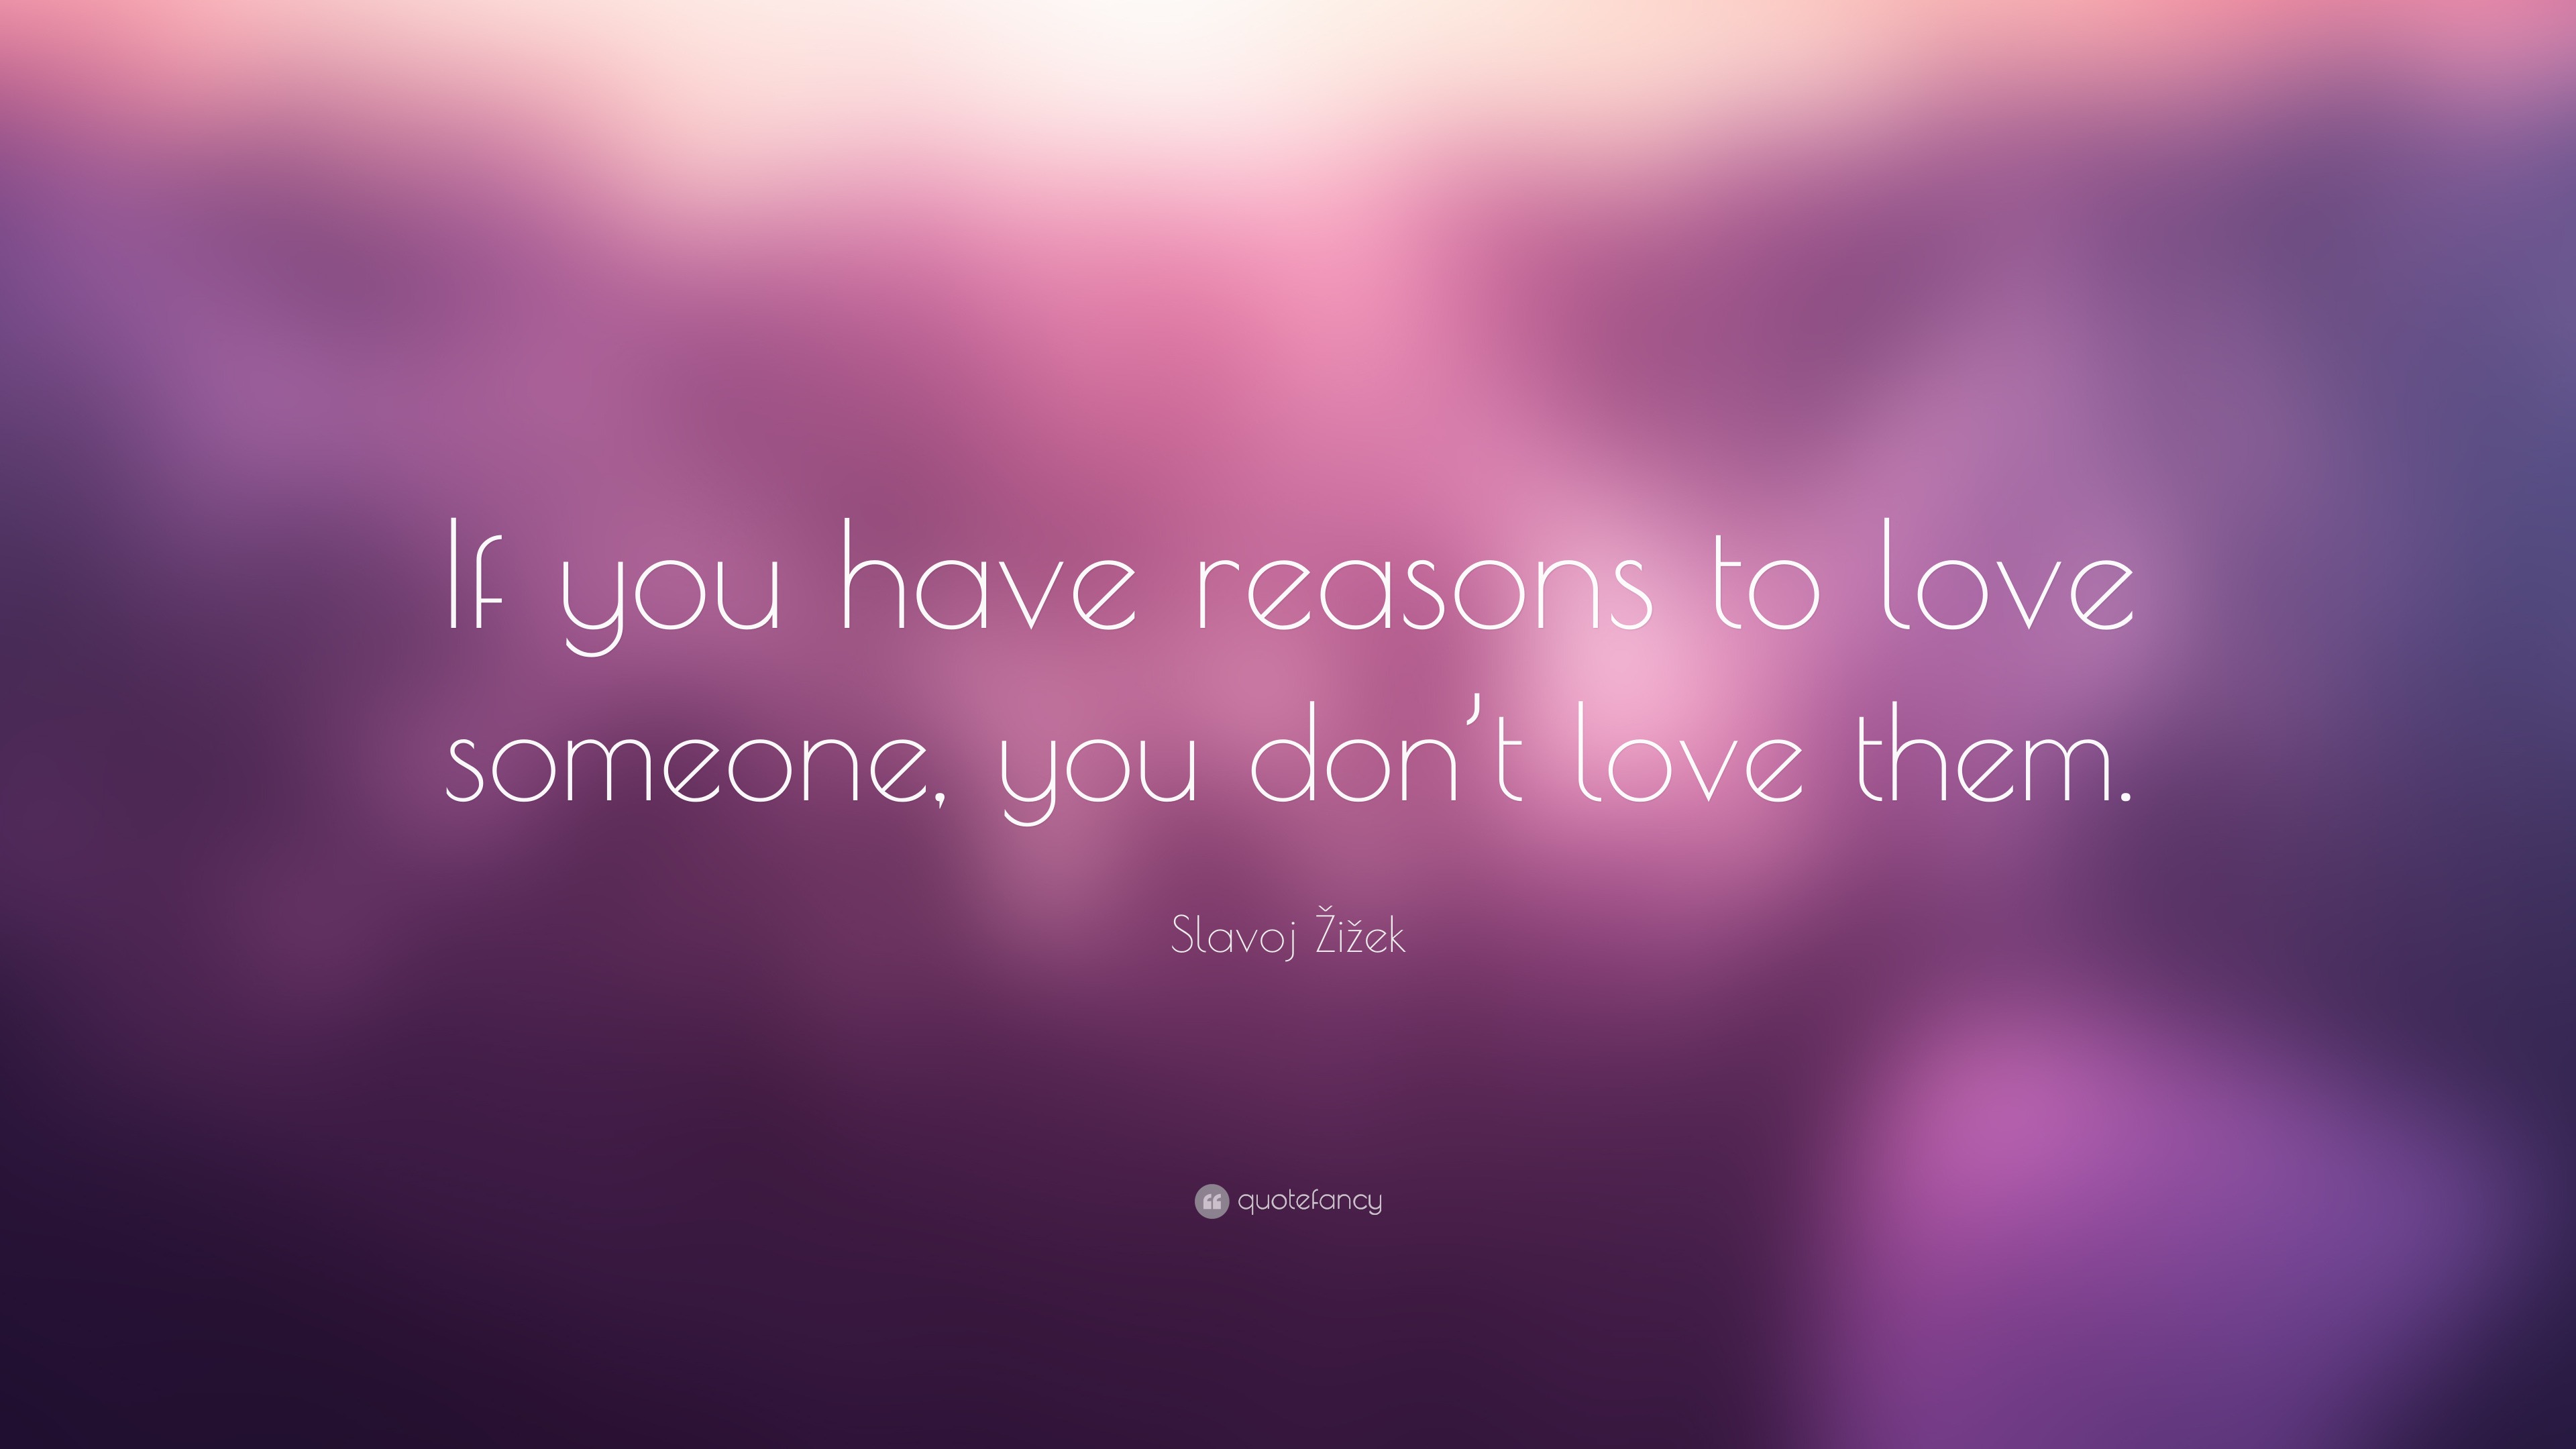 Slavoj Žižek Quote: “If you have reasons to love someone, you don’t ...